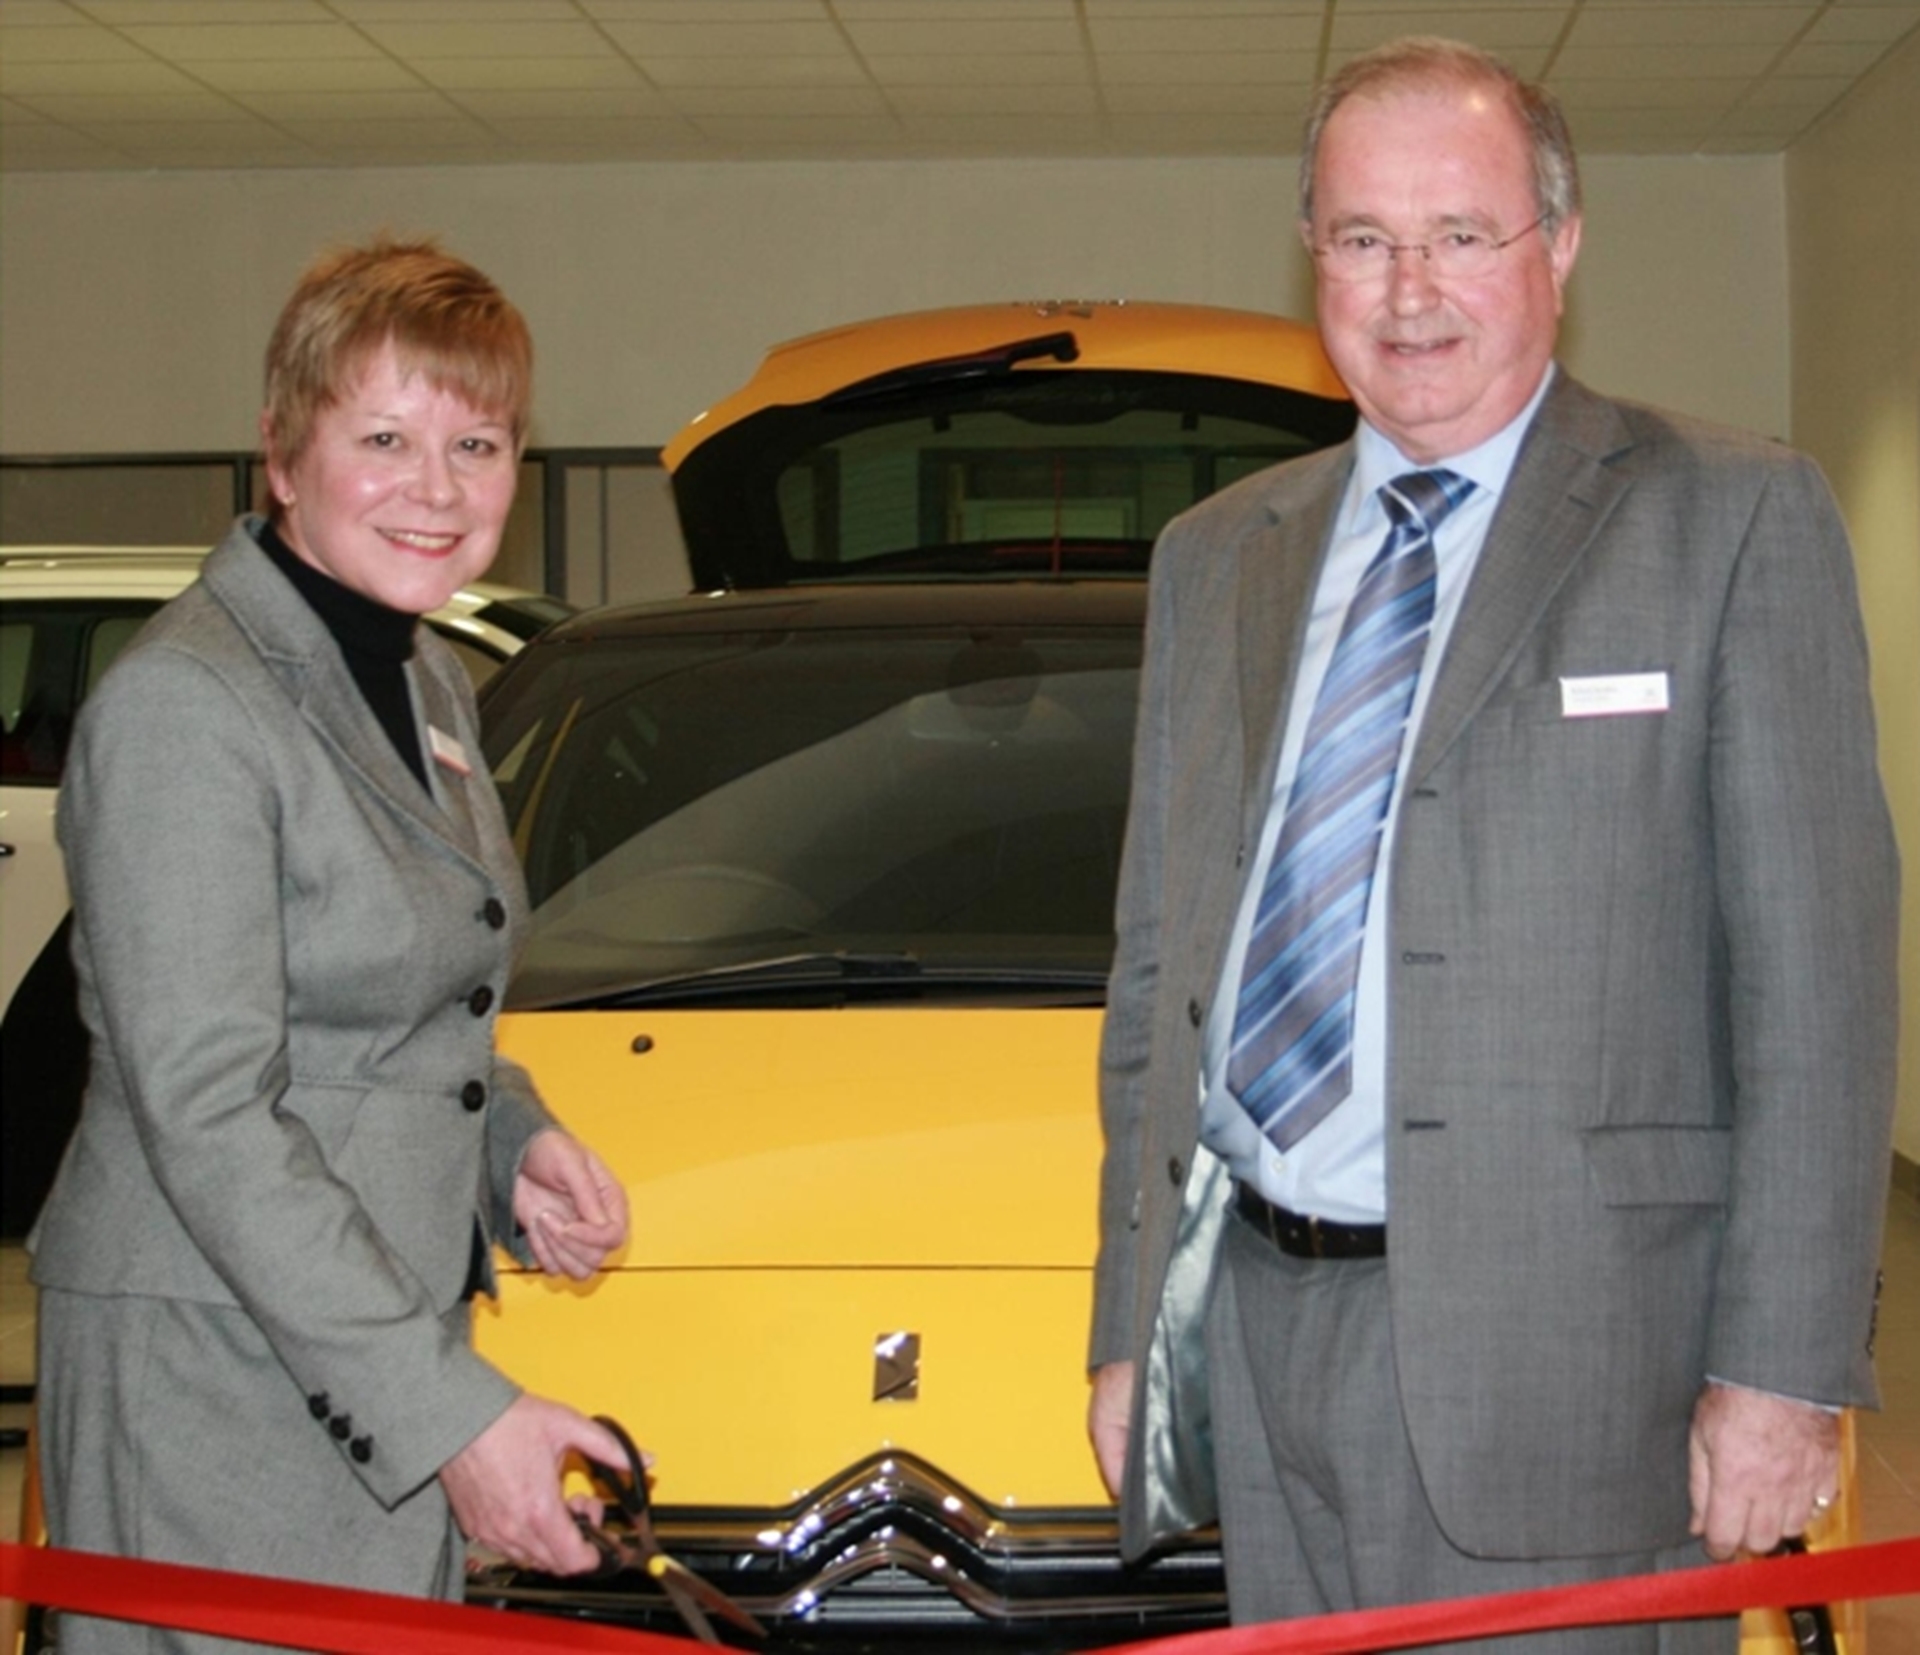 CITROËN DEALER NETWORK CONTINUES TO EXPAND WITH NEW OPERATOR IN NORTHAMPTON